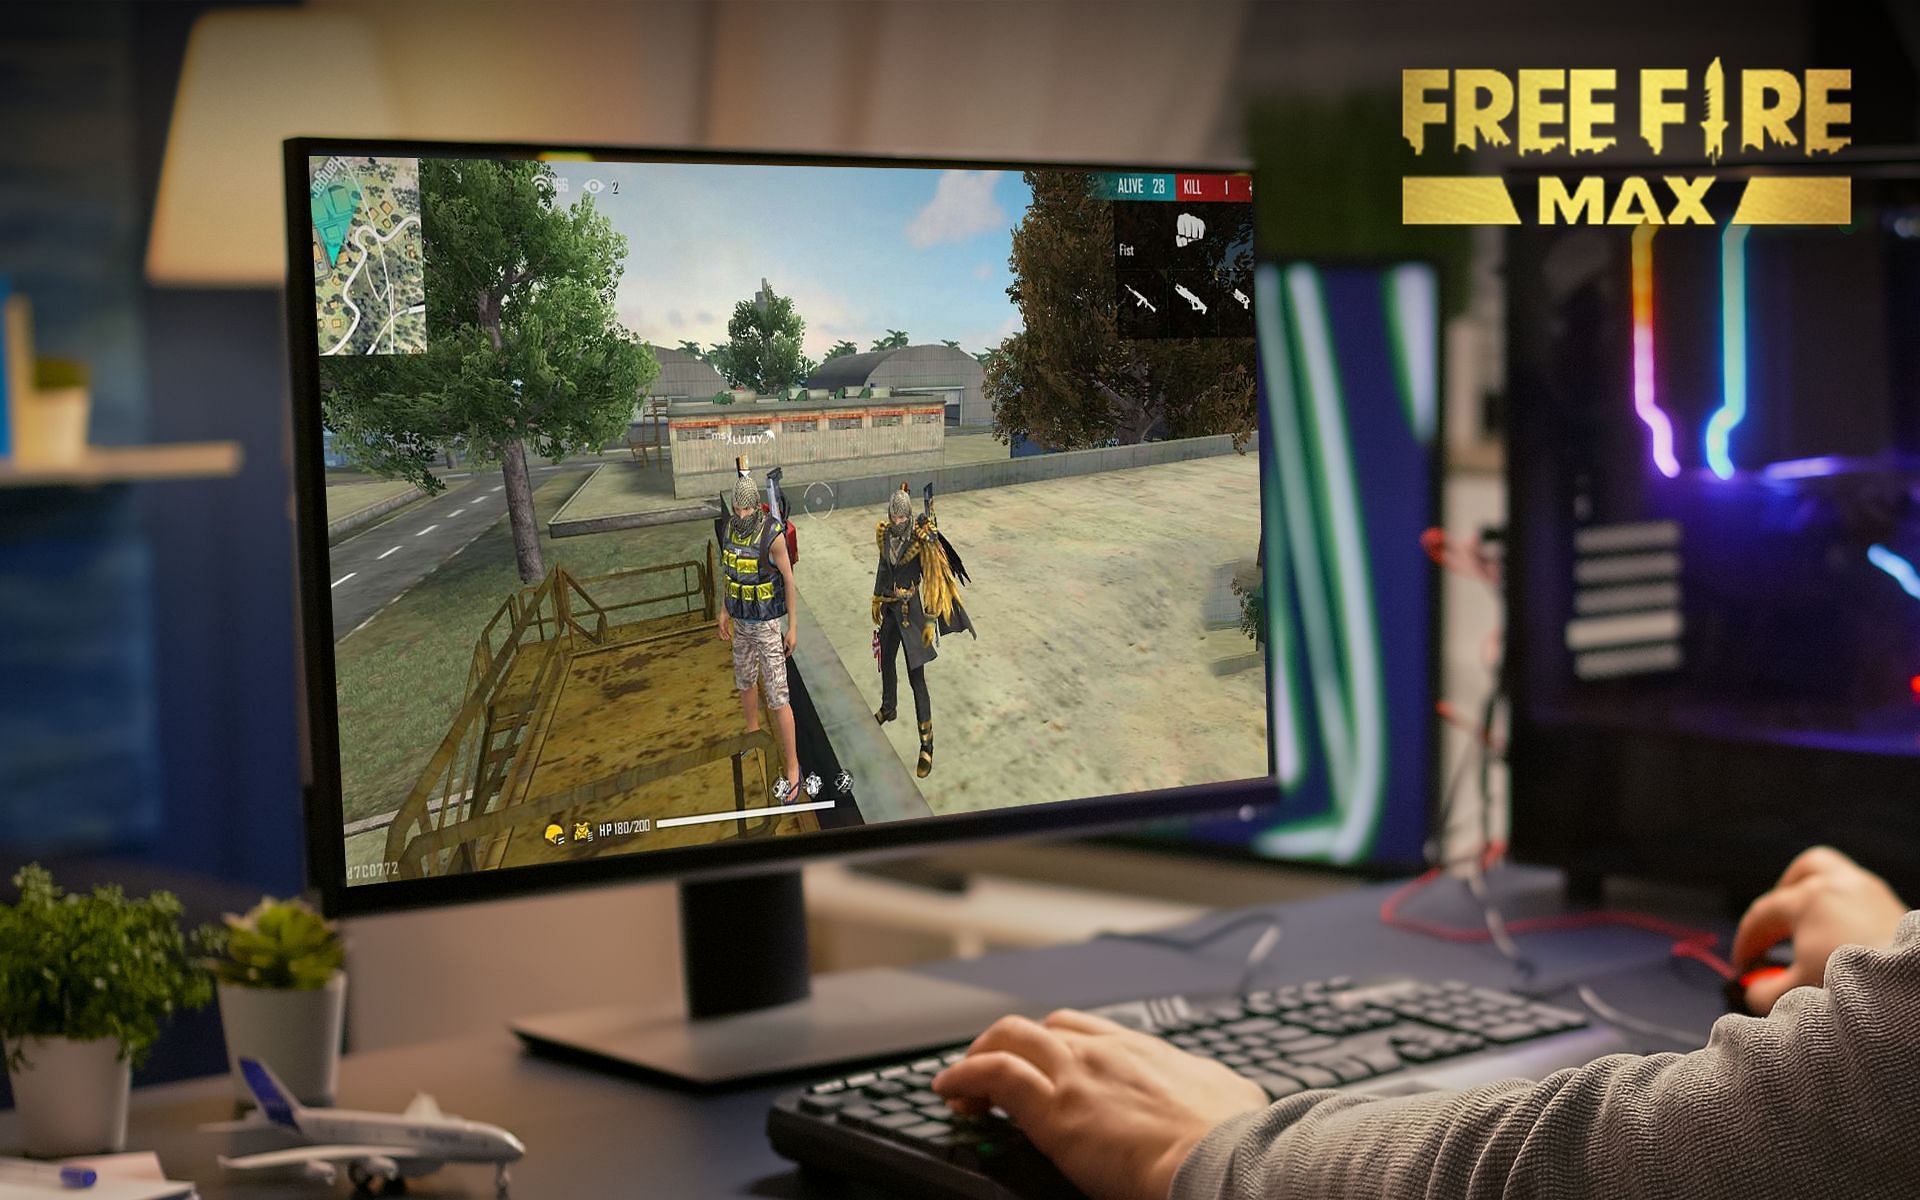 How to play free fire max in laptop